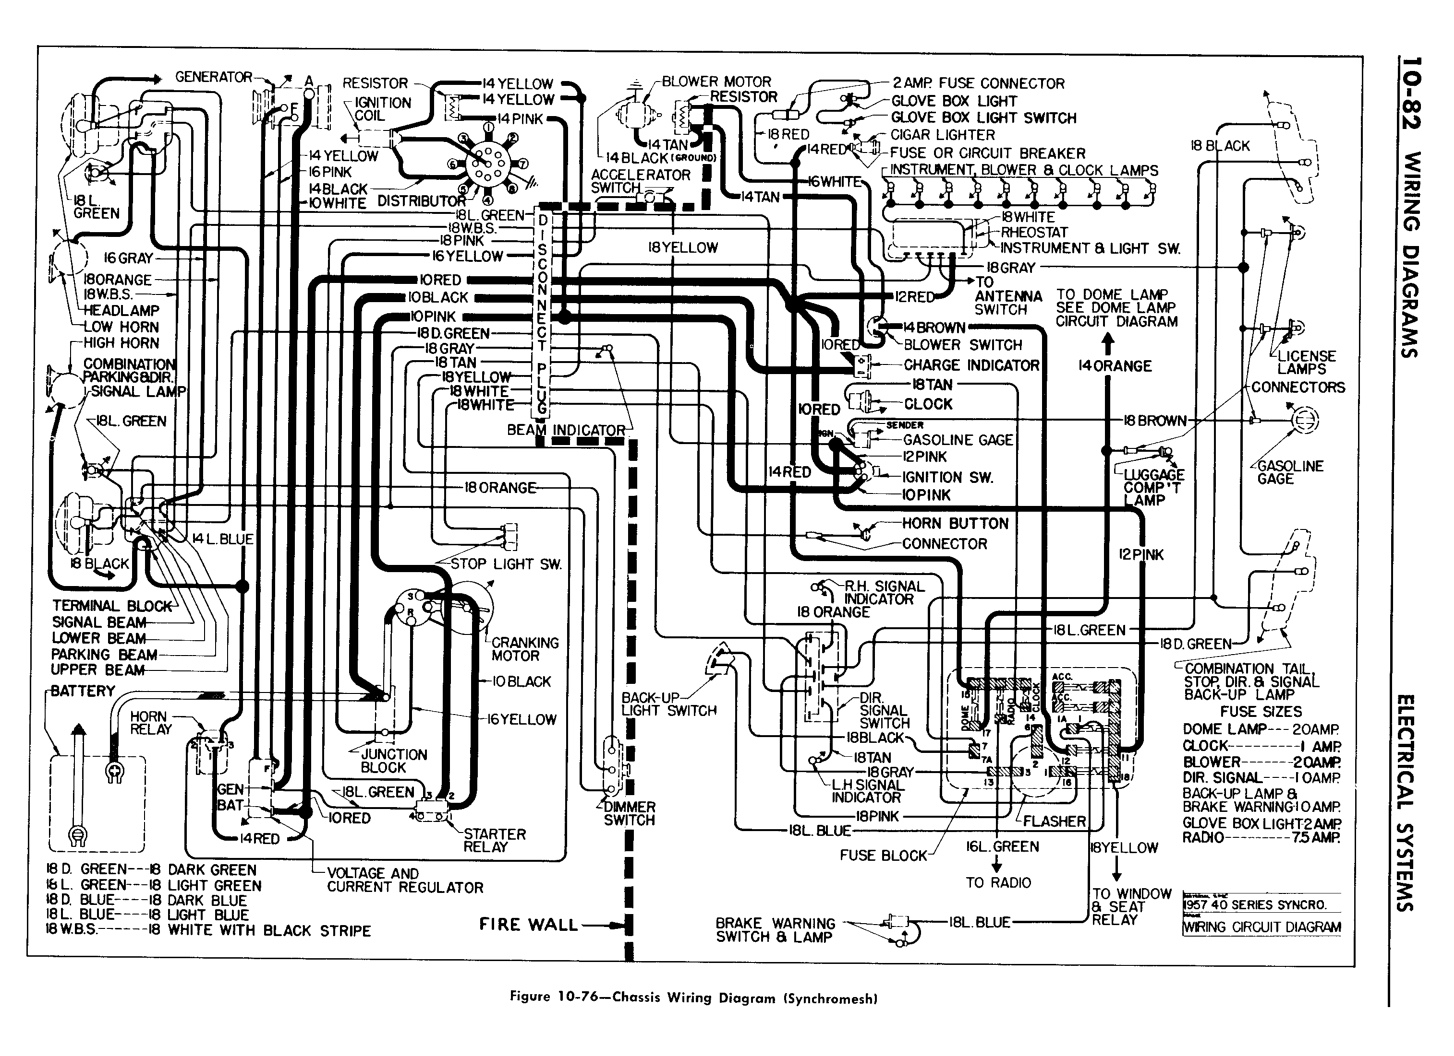 n_11 1957 Buick Shop Manual - Electrical Systems-082-082.jpg